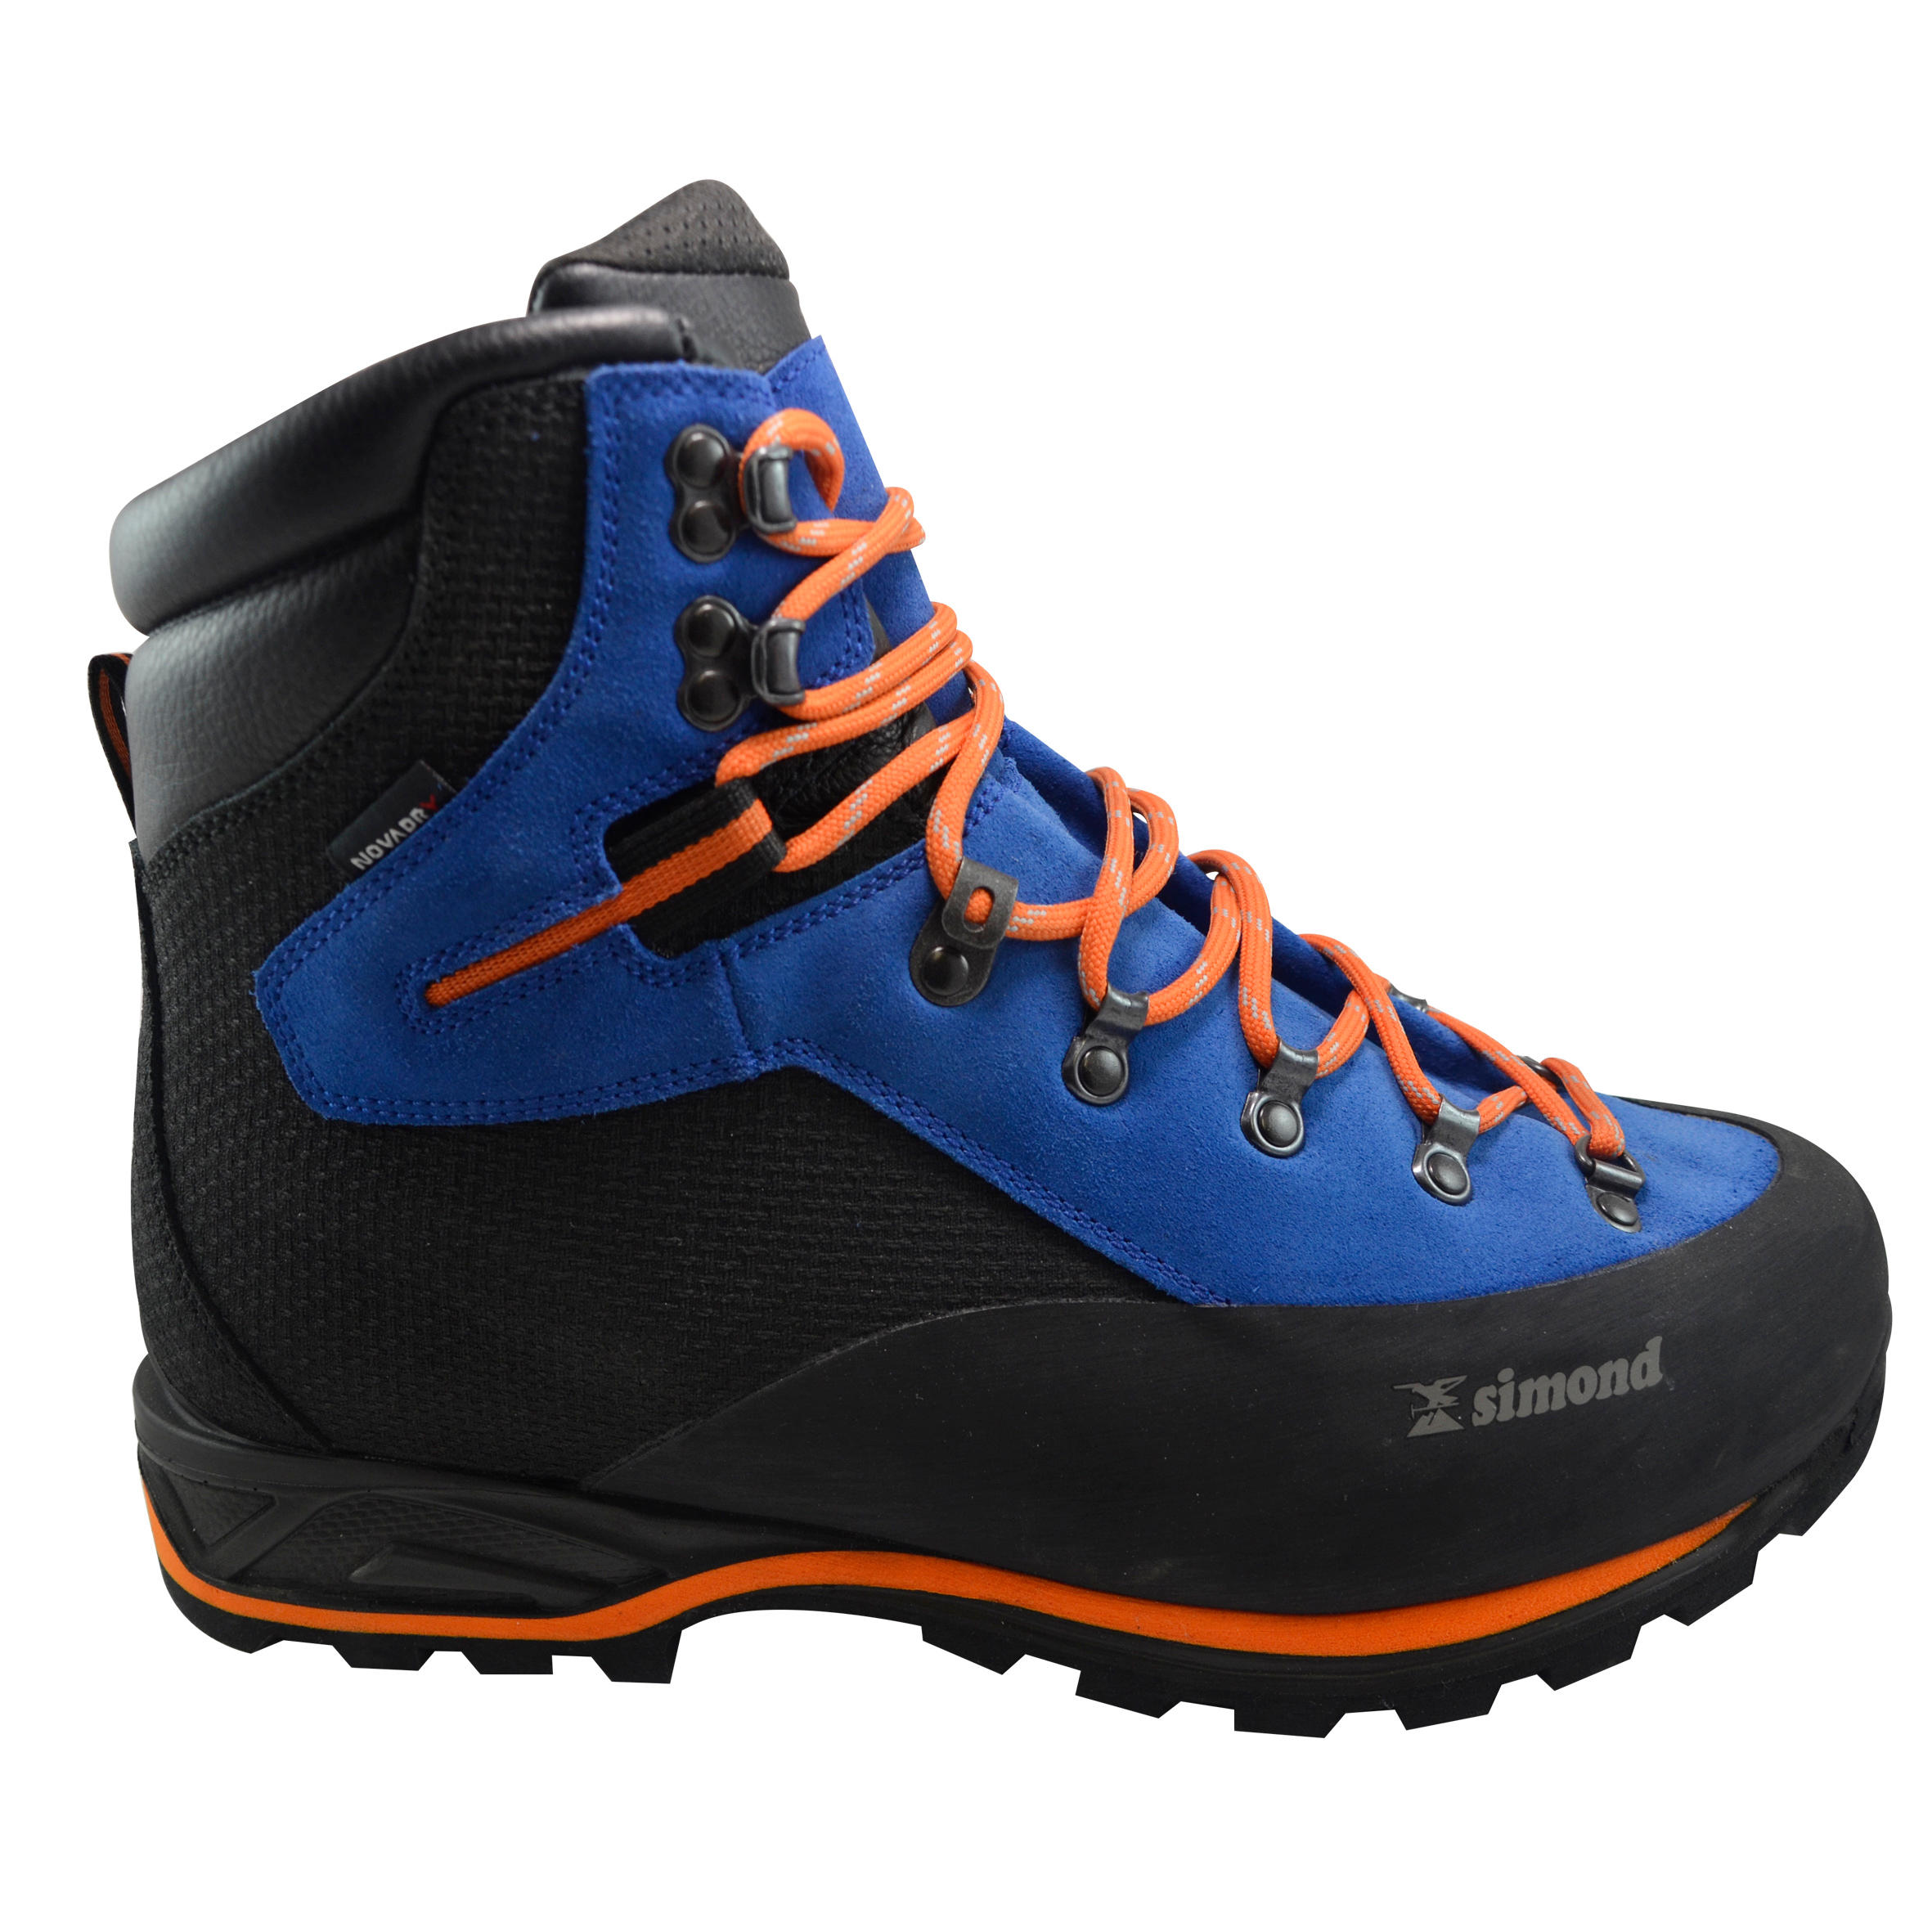 Mountaineering Boots - Blue Extra Sizes36; 37; 38; 39; 40; 47 4/11